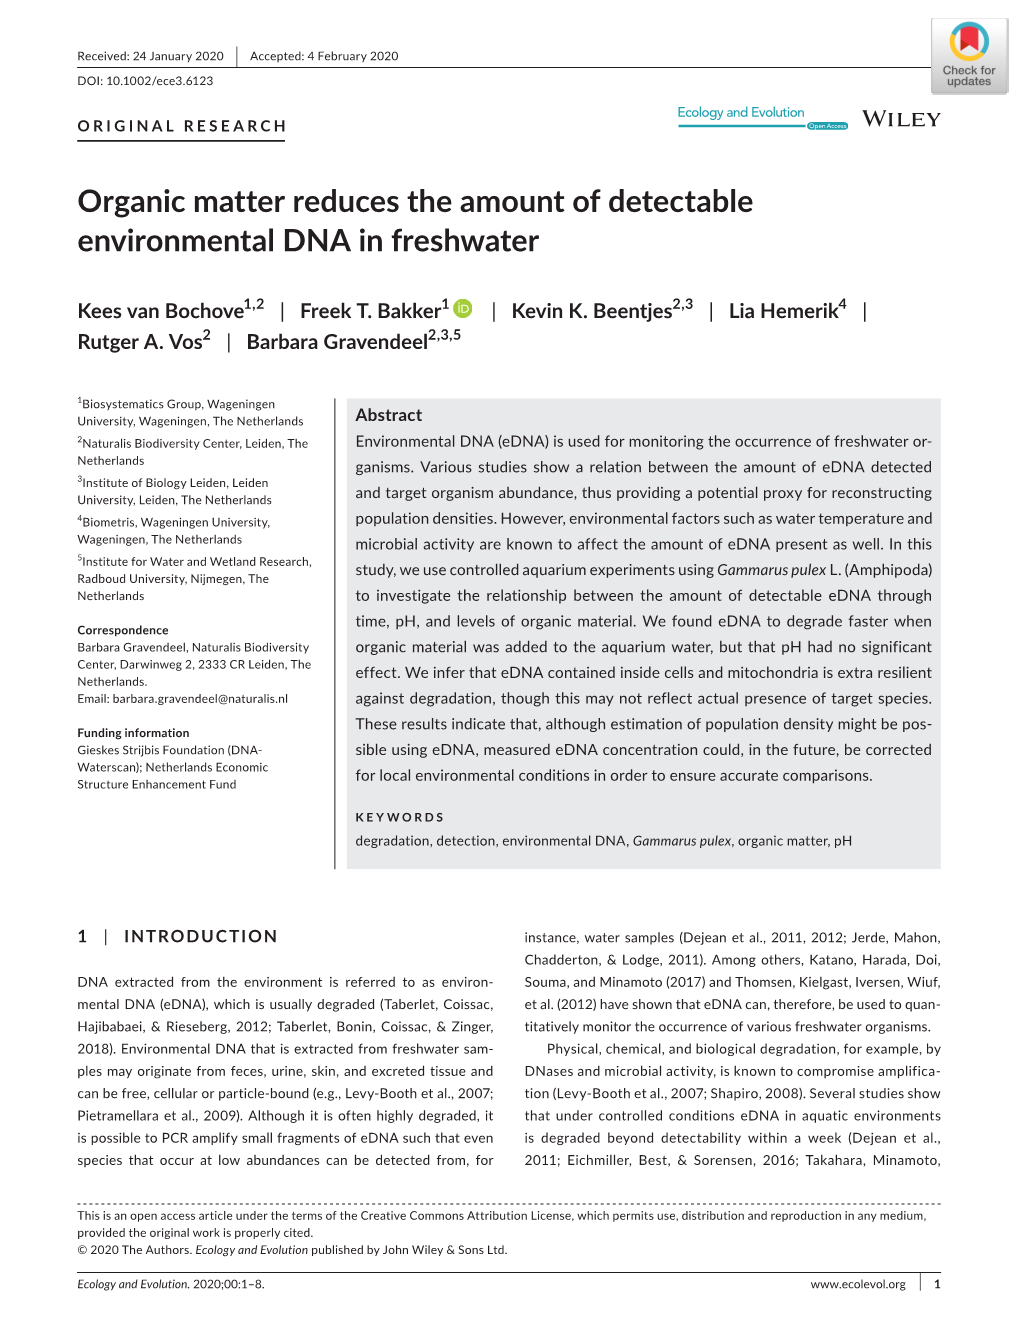 Organic Matter Reduces the Amount of Detectable Environmental DNA in Freshwater